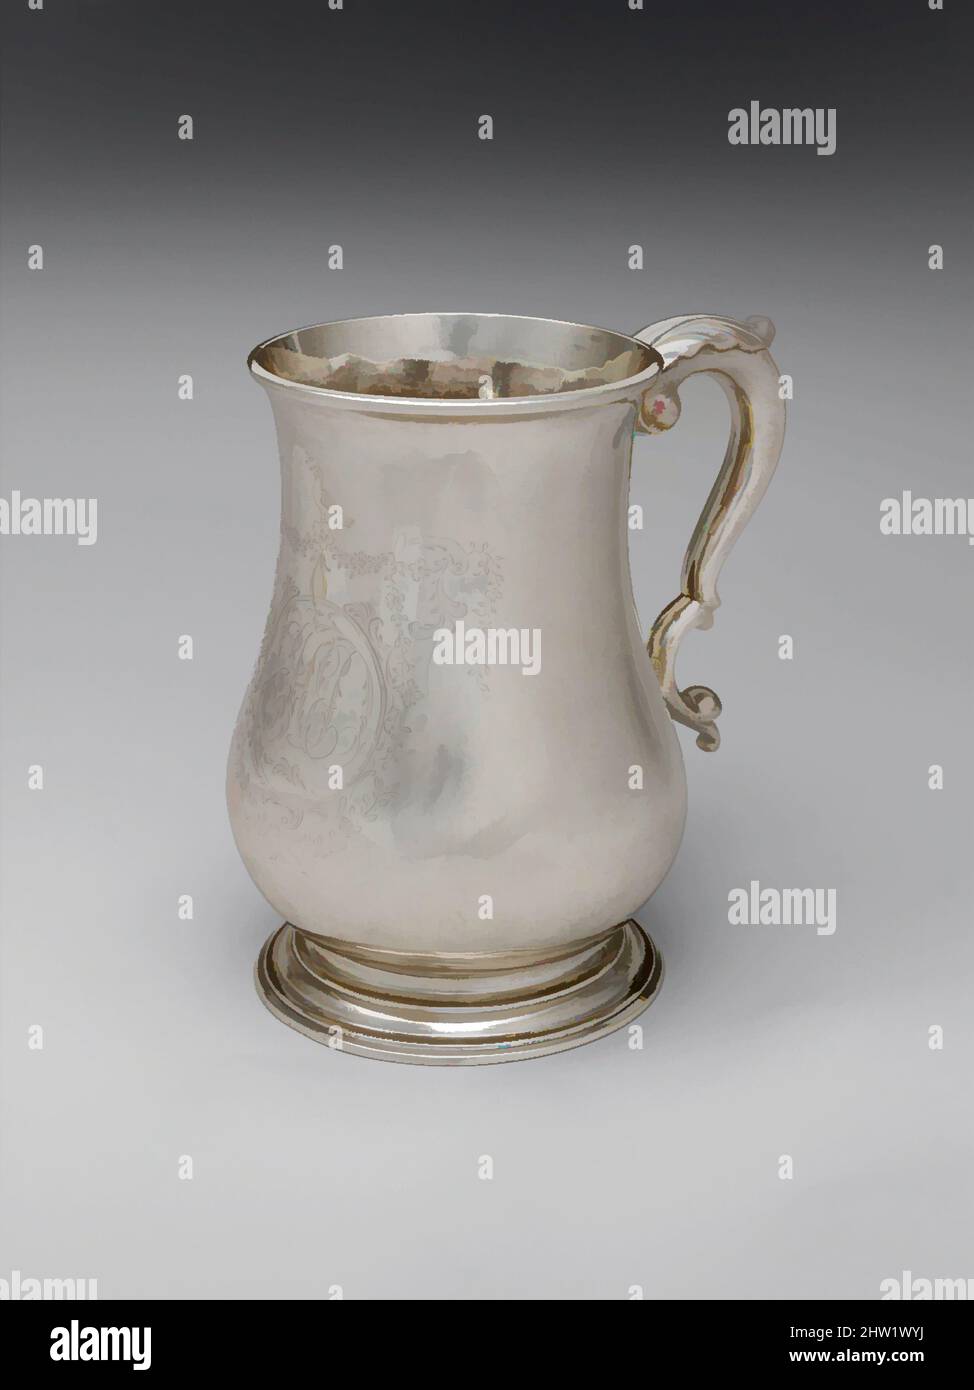 Art inspired by Cann, 1783, Made in Boston, Massachusetts, United States, American, Silver, Overall: 6 1/2 x 6 3/8 in. (16.5 x 16.2 cm); 22 oz. 6 dwt. (693 g), Silver, Paul Revere Jr. (American, Boston, Massachusetts 1734–1818 Boston, Massachusetts), Cann, a term used interchangeably, Classic works modernized by Artotop with a splash of modernity. Shapes, color and value, eye-catching visual impact on art. Emotions through freedom of artworks in a contemporary way. A timeless message pursuing a wildly creative new direction. Artists turning to the digital medium and creating the Artotop NFT Stock Photo